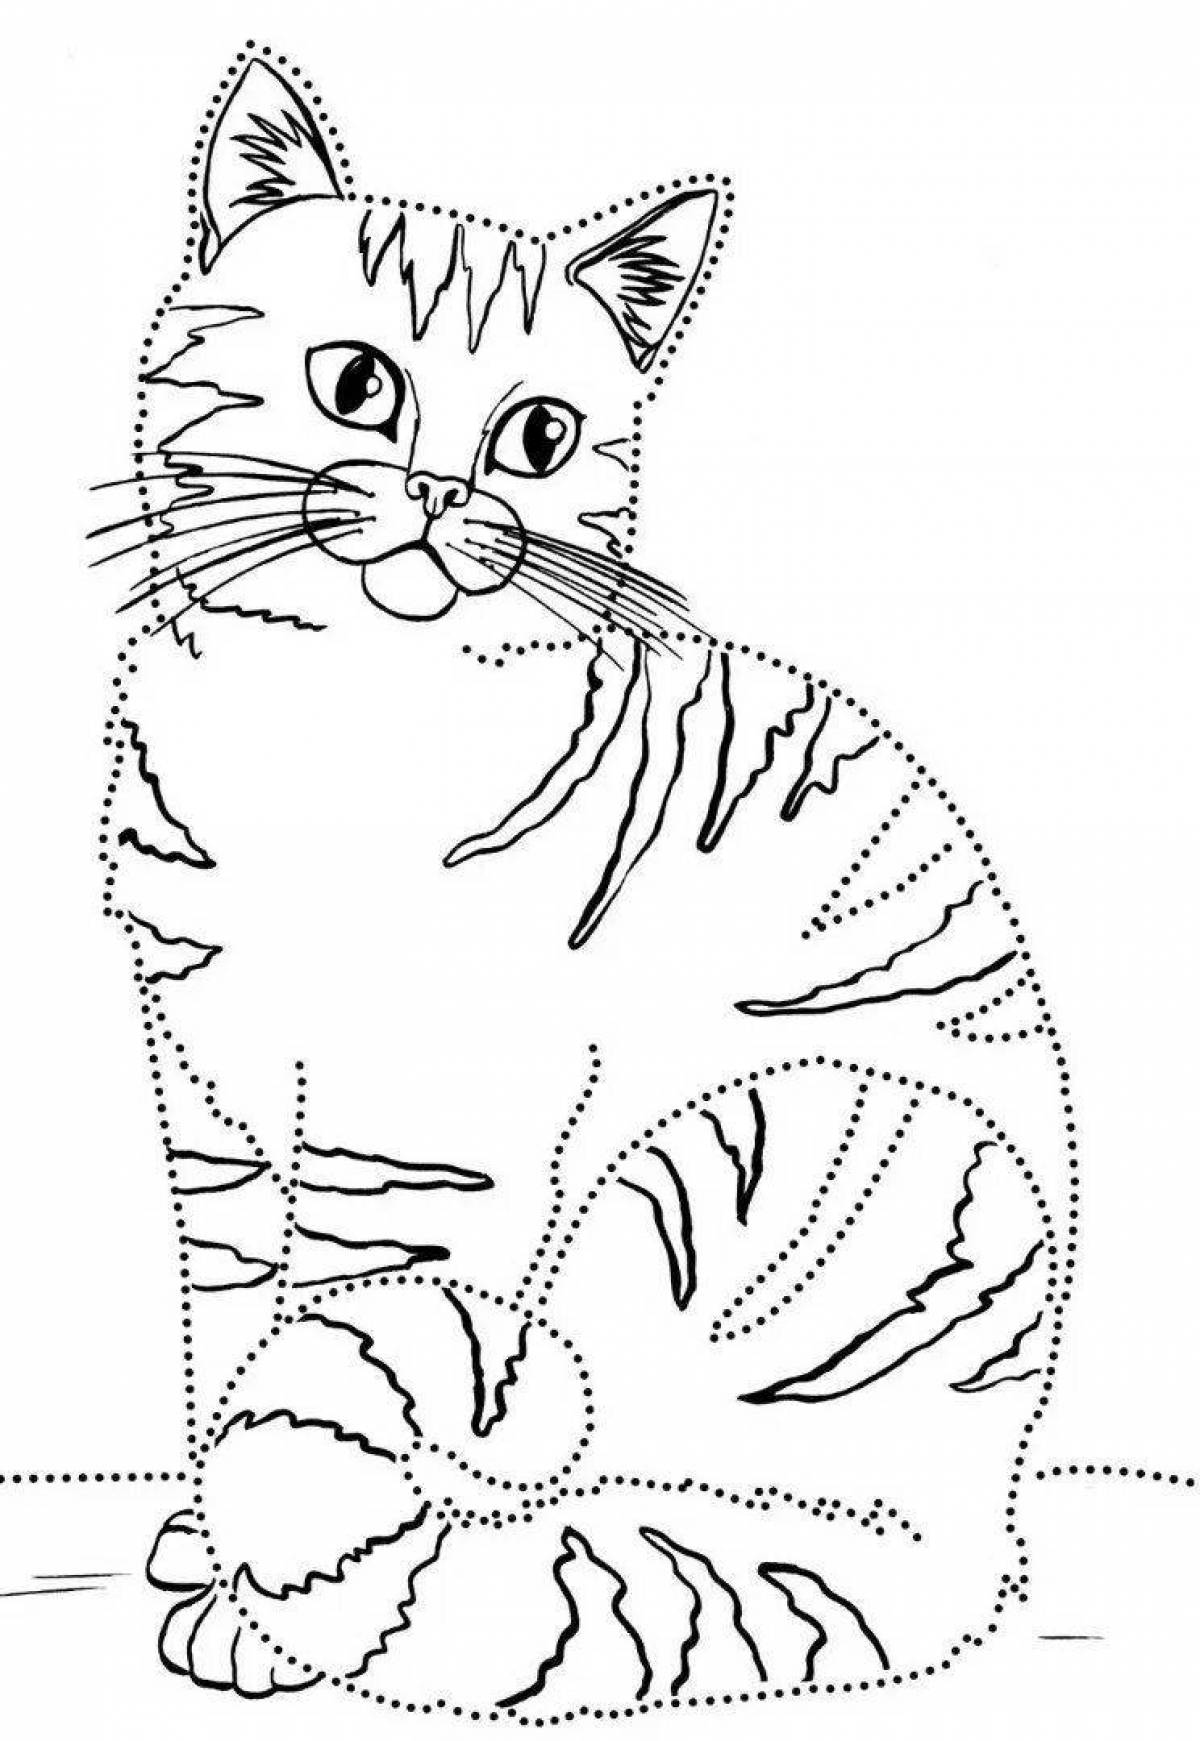 Naughty kittens coloring book for children 6-7 years old